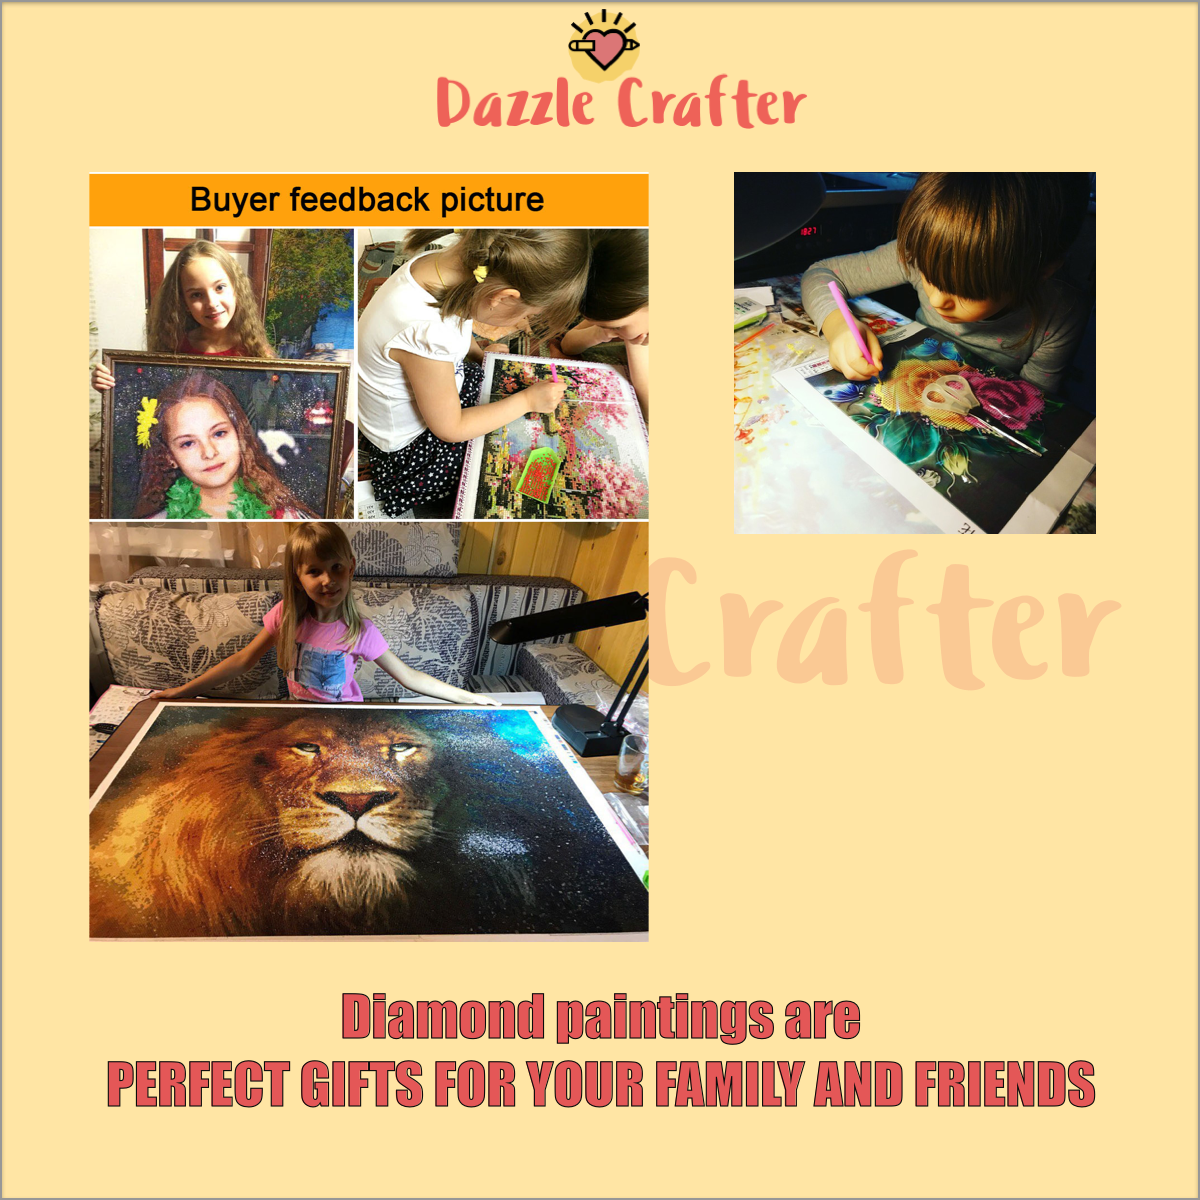 Flag with Deer Diamond Painting Kit - DAZZLE CRAFTER